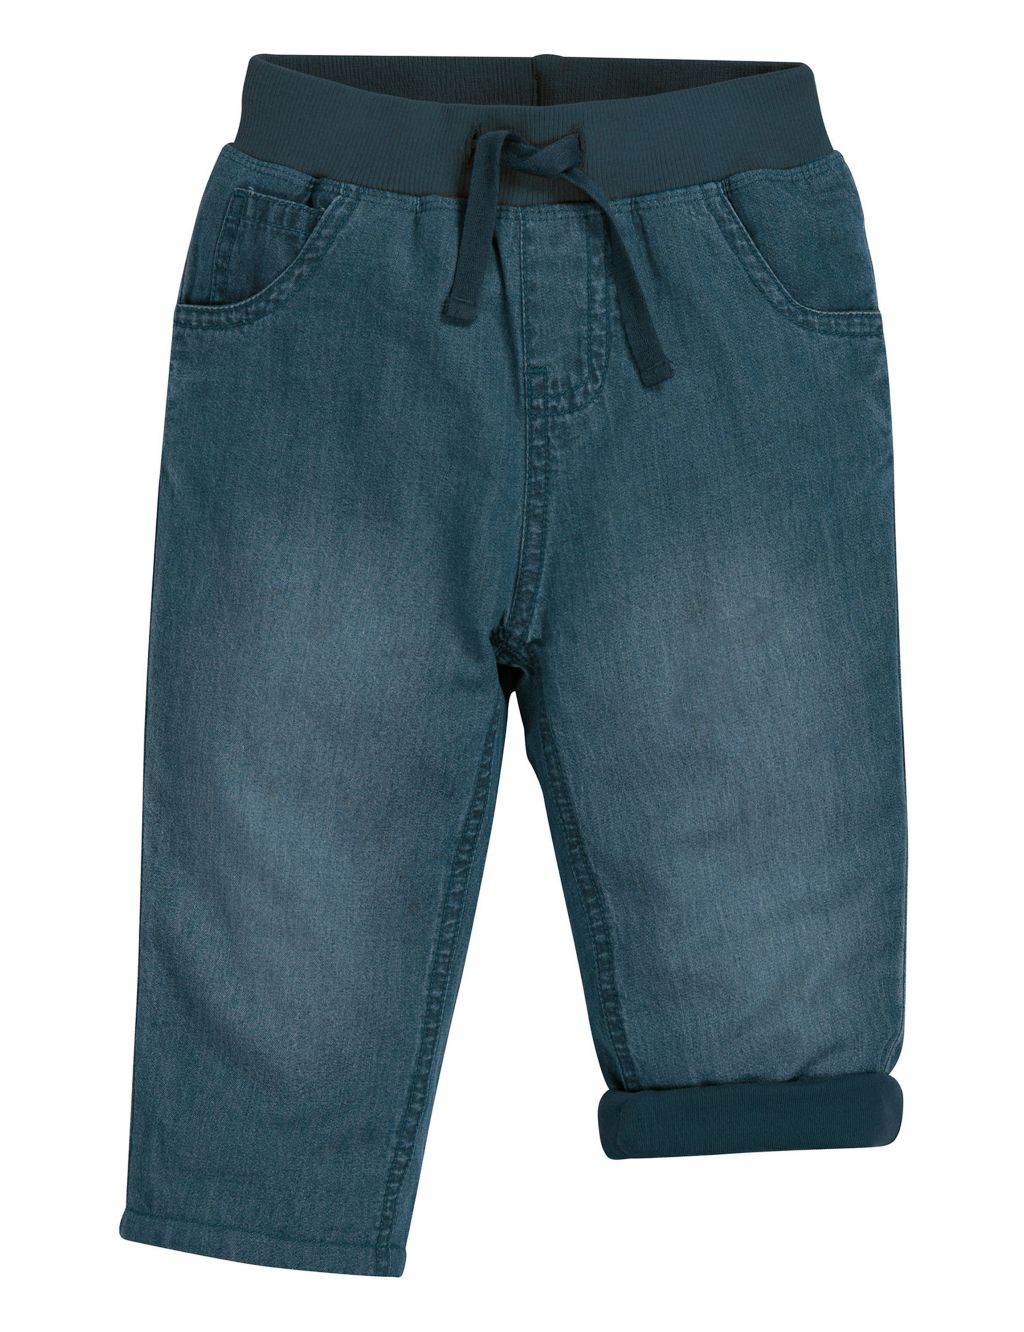 Organic Cotton Lined Jeans (0-5 Yrs) image 1